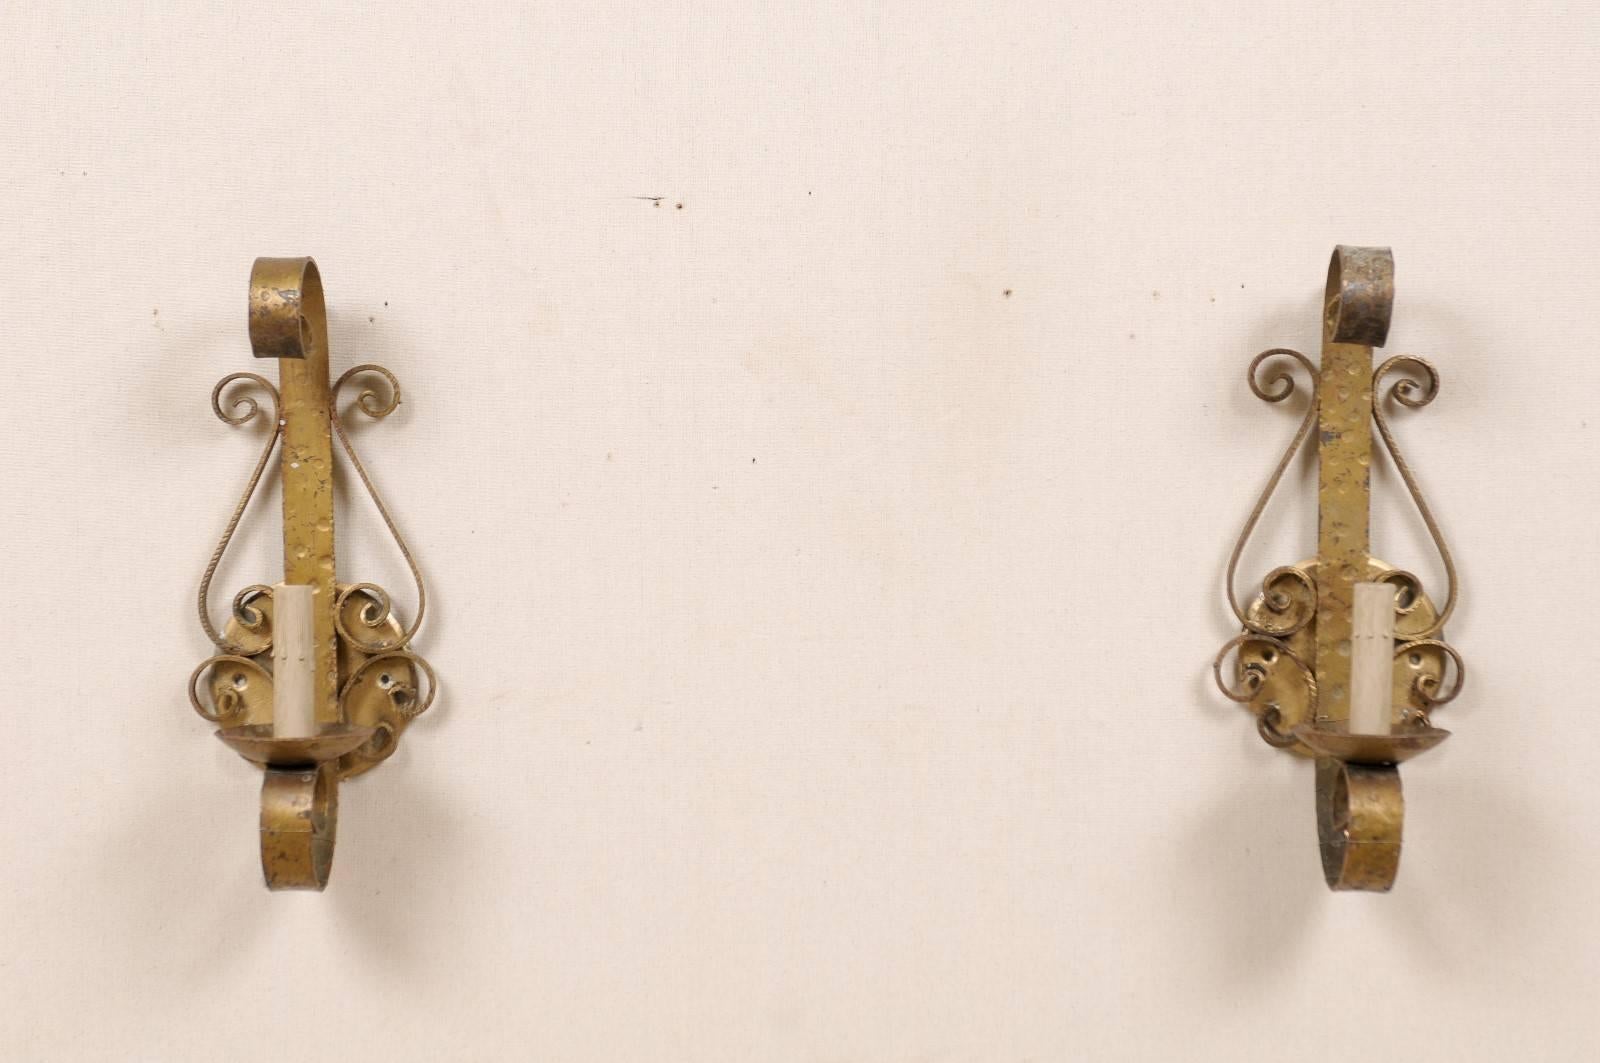 A pair of Spanish forged iron, painted gold single-light sconces from the mid-20th century. This pair of sconces has scrolled arms supporting the bobèches and painted candle sleeves as well as scroll decorations adorning the sides. This pair is a